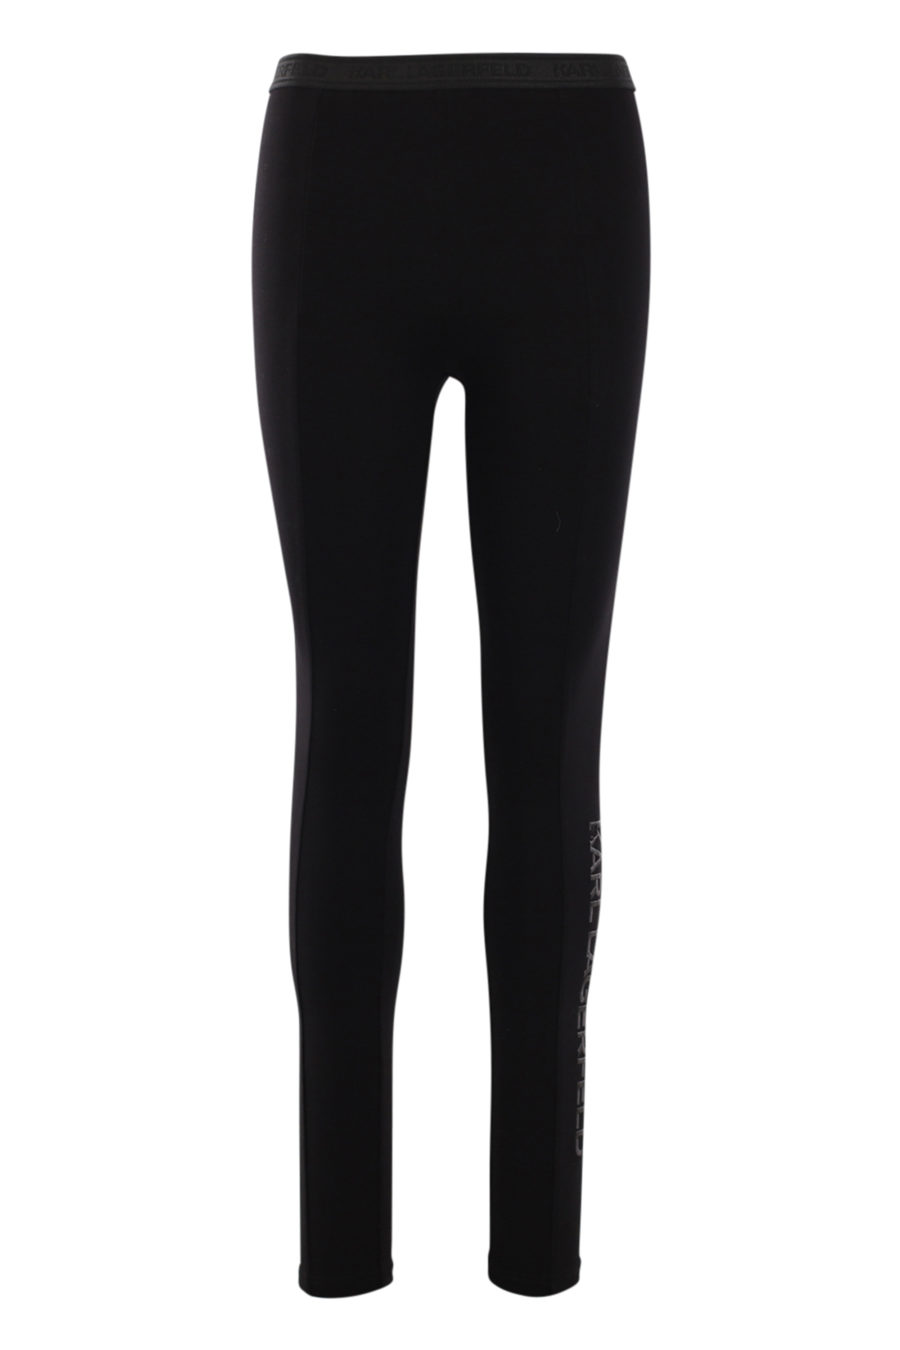 Black leggings with embroidered logo on the side - IMG 0503